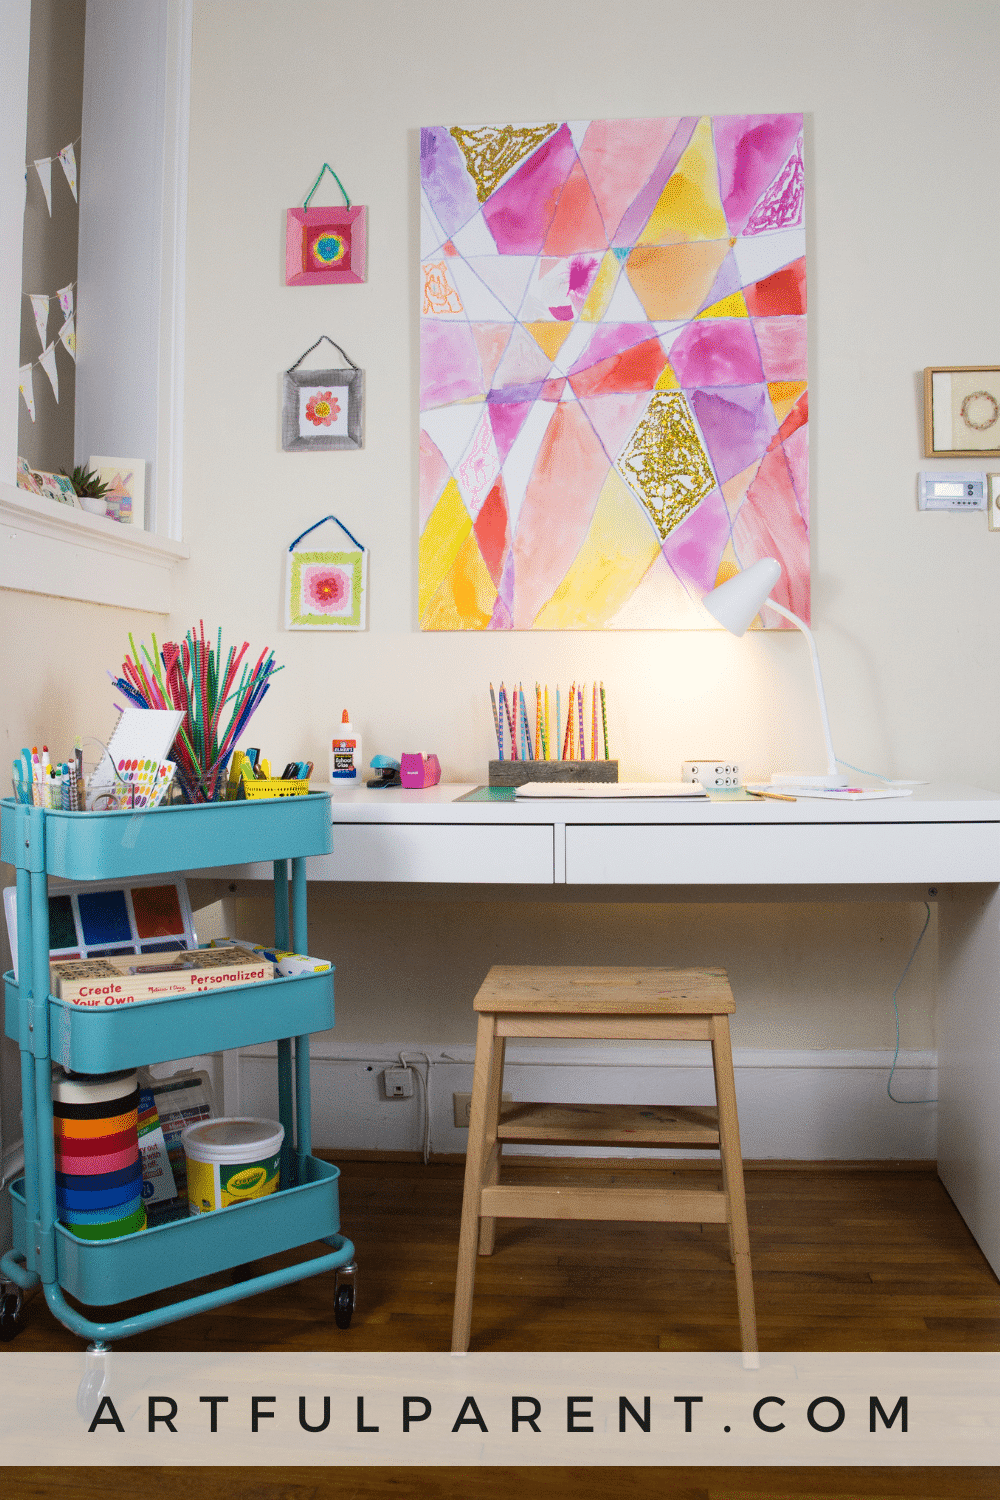 6 Tips and Ideas for an Art Room